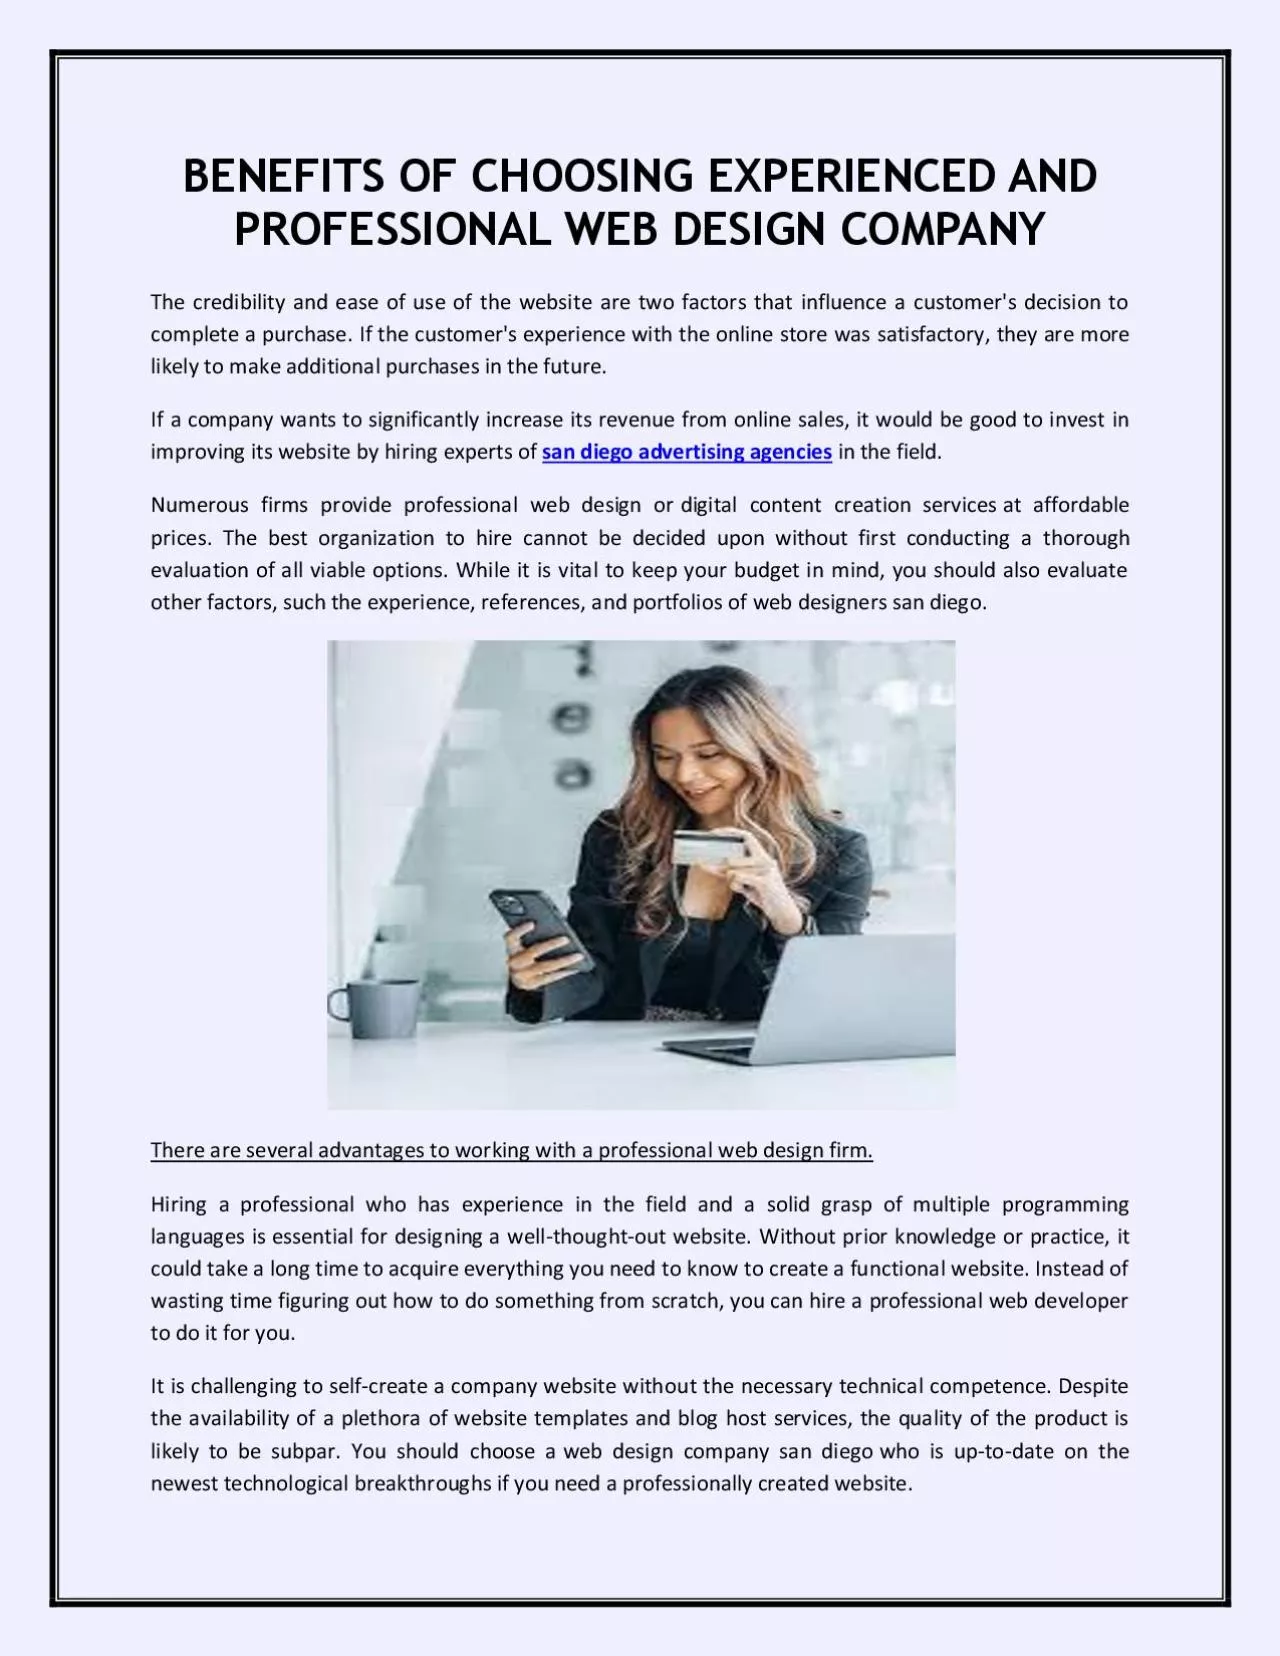 BENEFITS OF CHOOSING EXPERIENCED AND PROFESSIONAL WEB DESIGN COMPANY